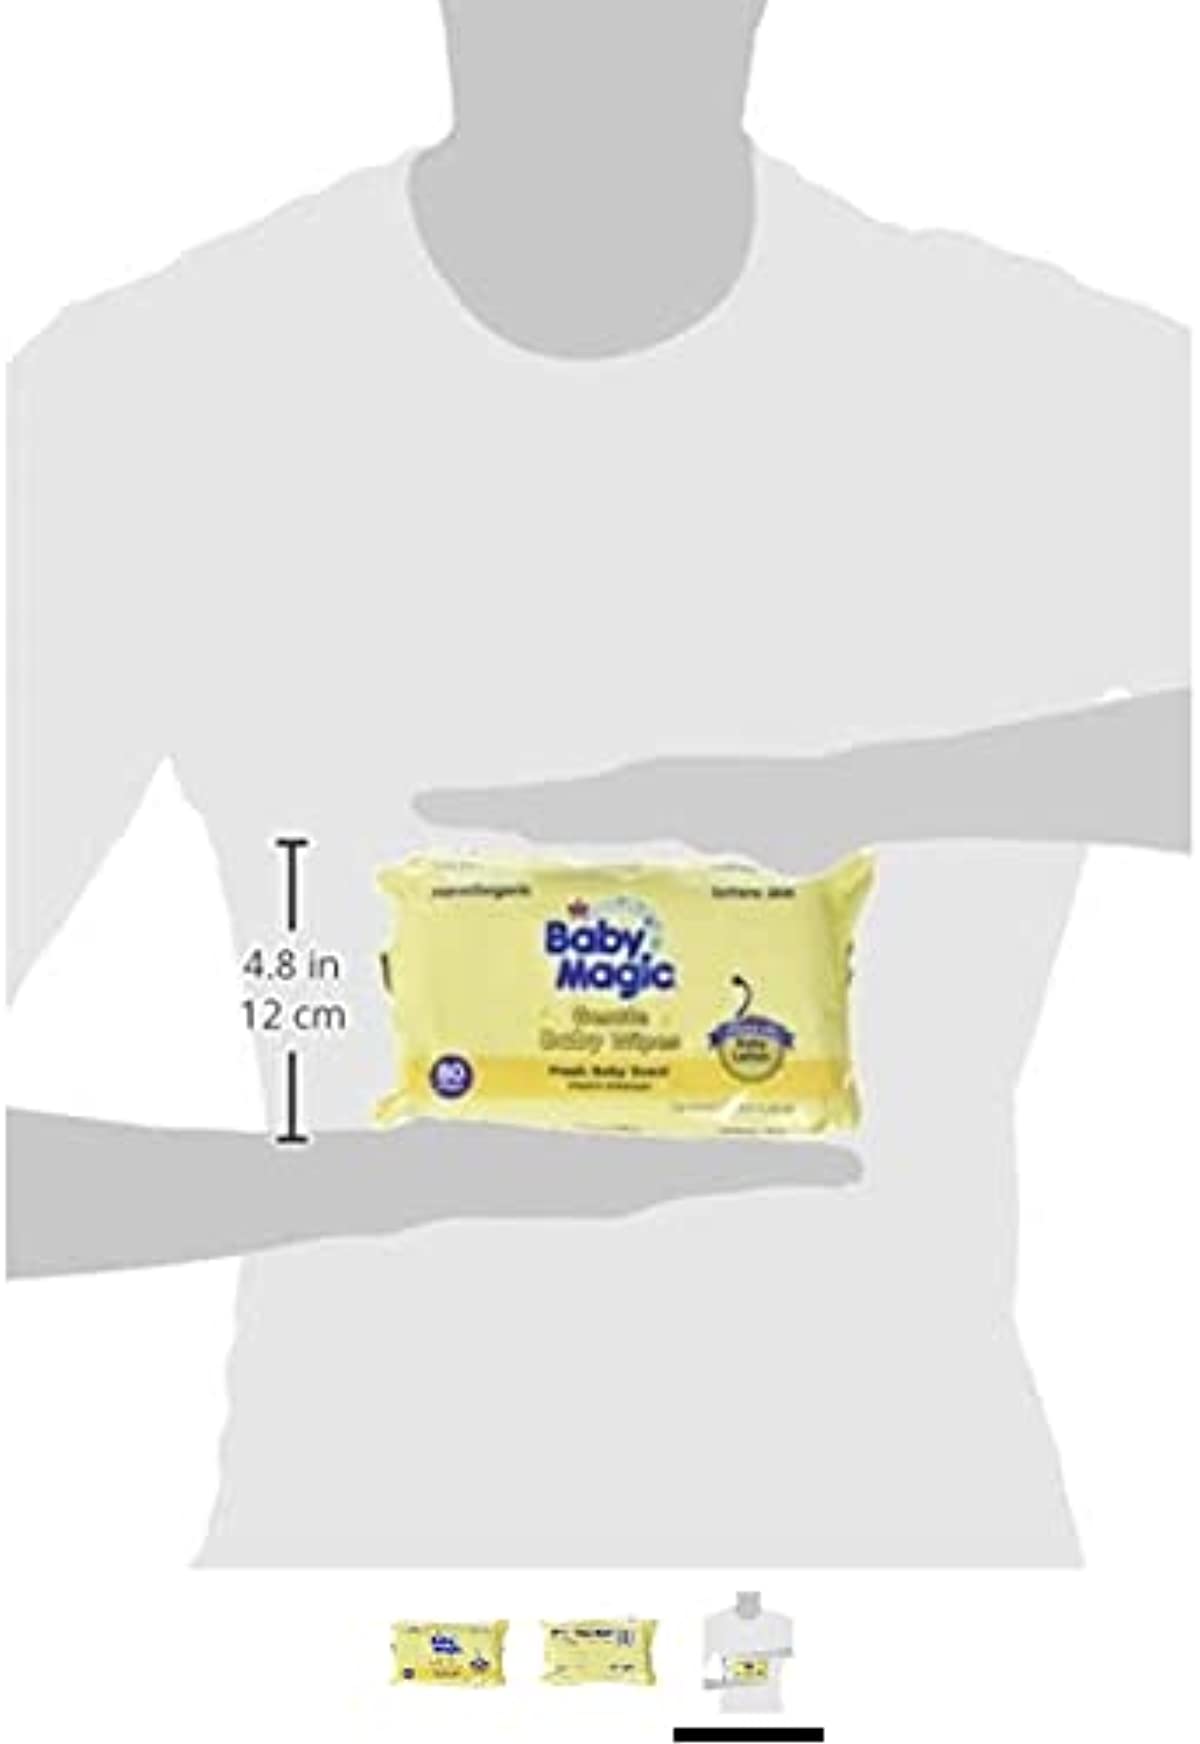 80 Count Fresh Baby Scent Gentle Baby Magic Wipes Refill Travel Packs Hypoallergenic with Lotion and Vitamins to Soft Baby\'s Skin Value Pack Options (1 pack)